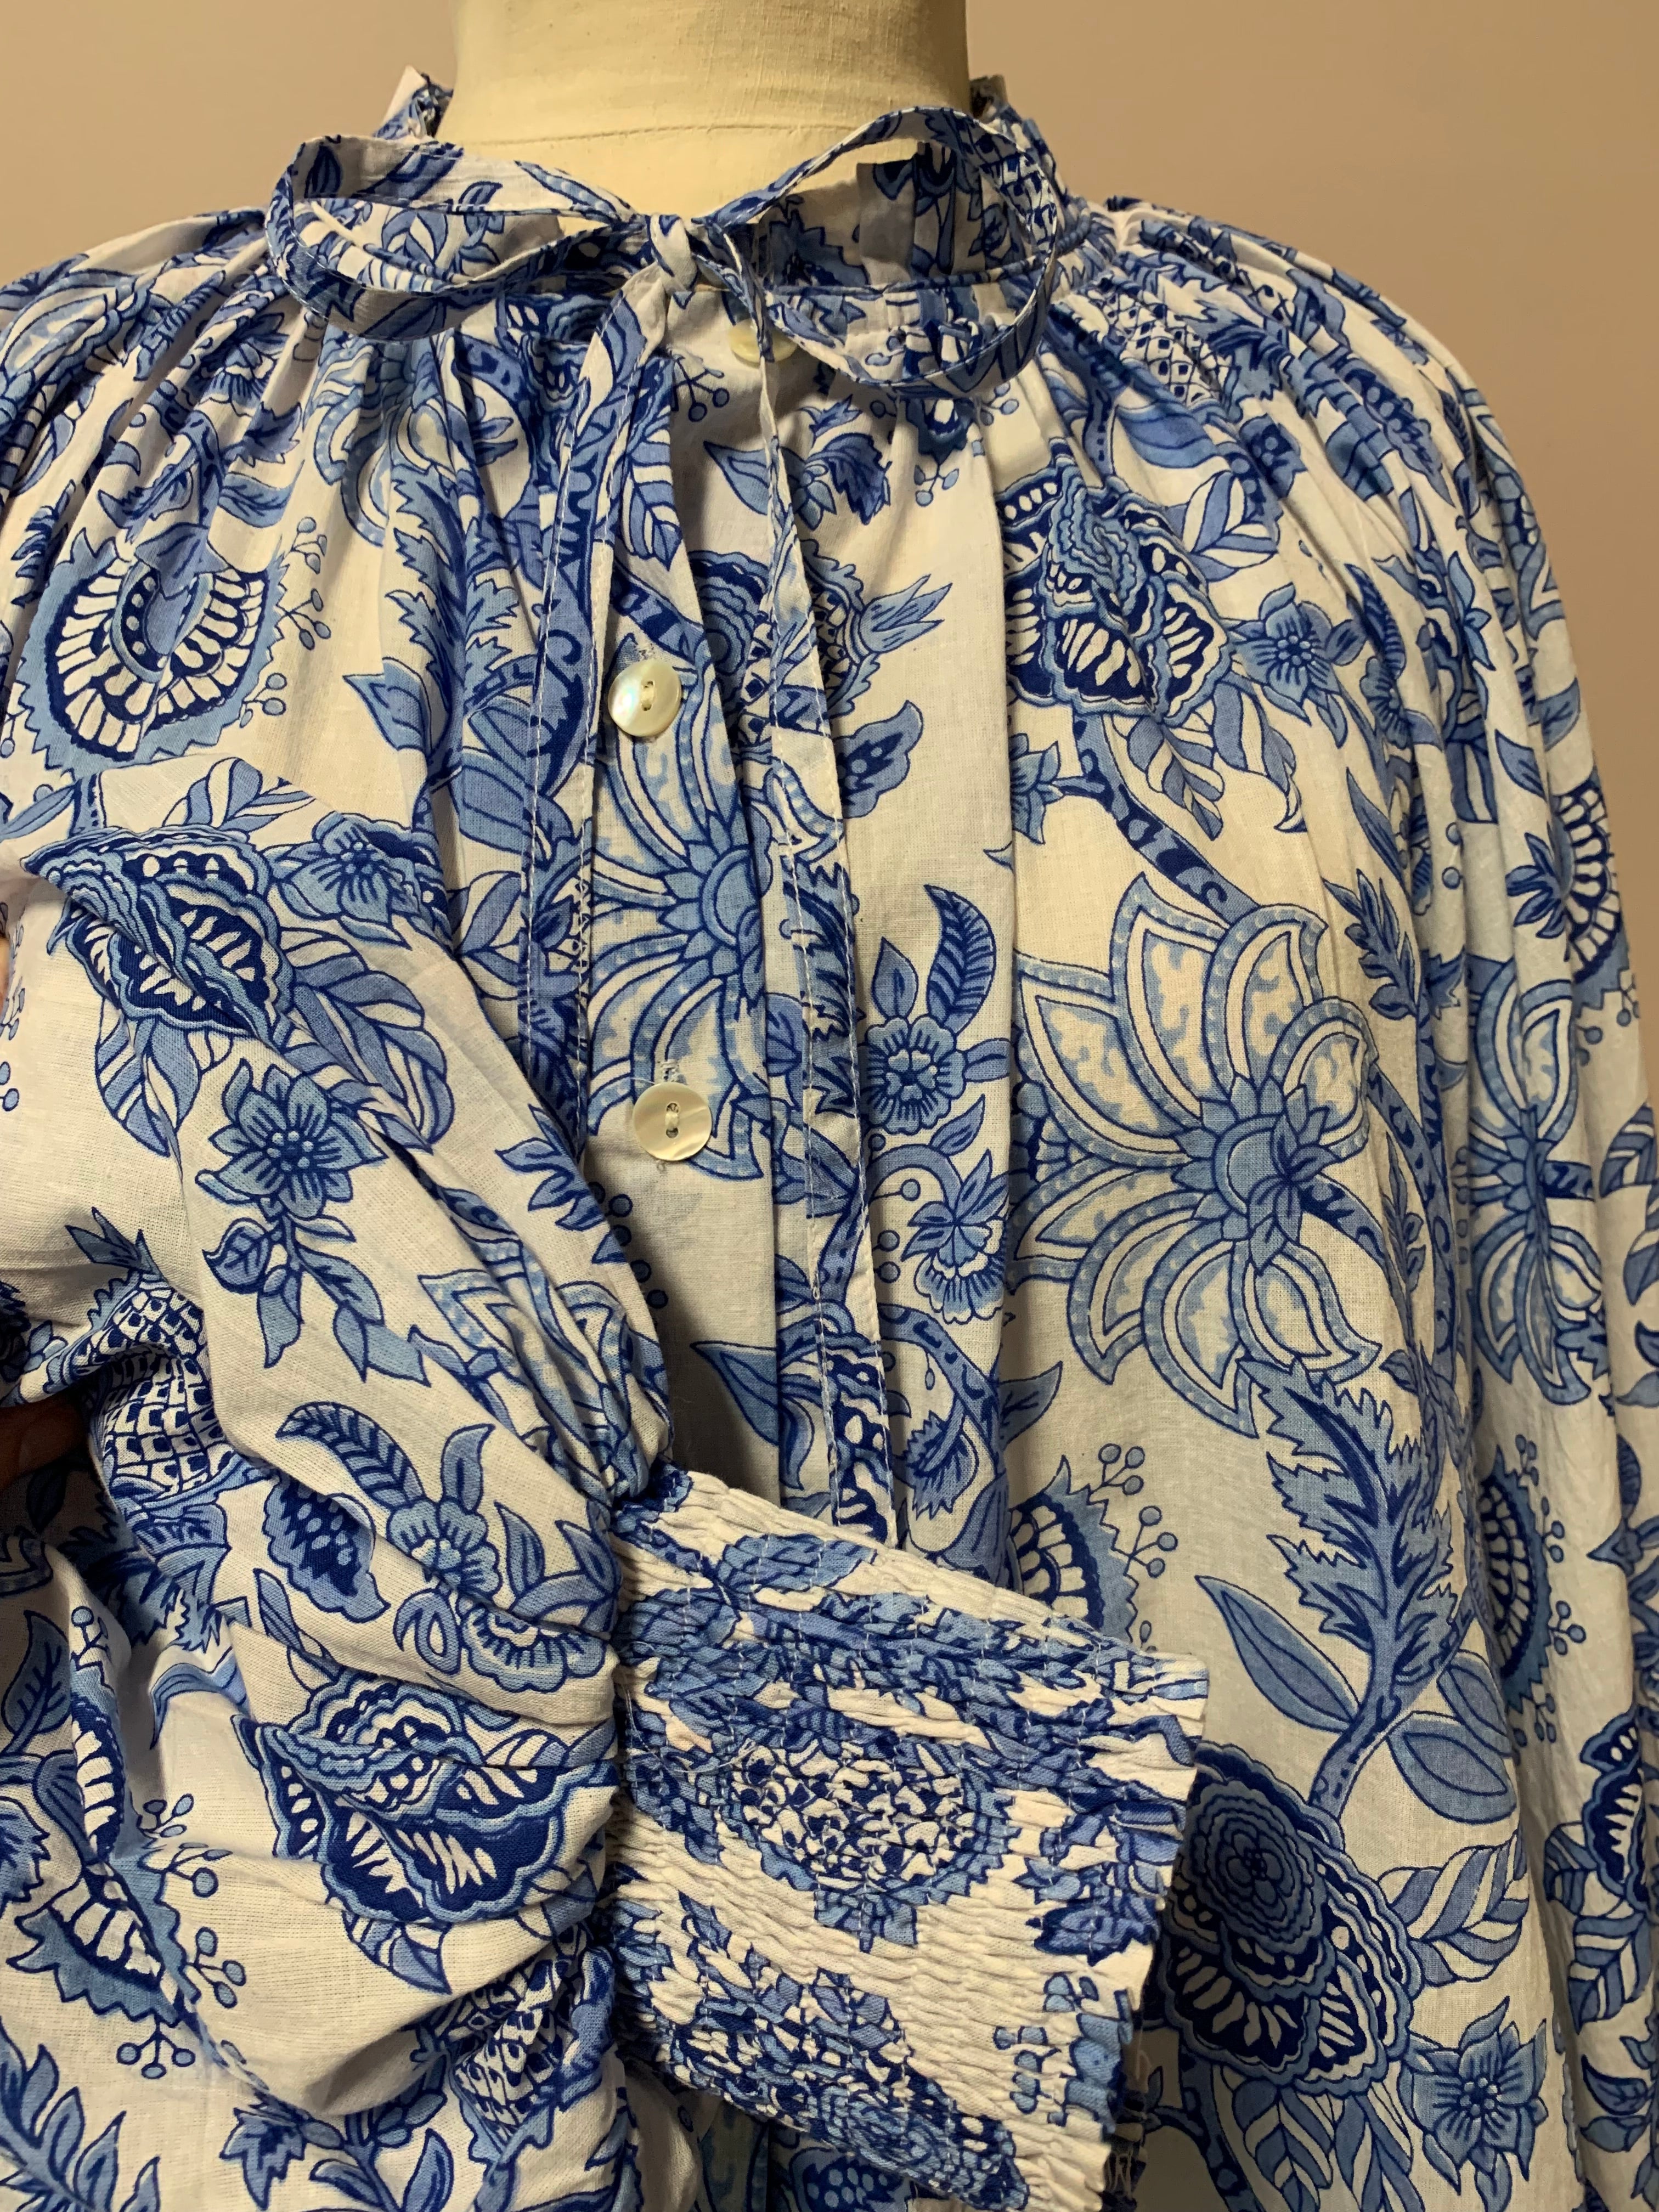 Long Sleeve Faith Top - Woodblock Printed Cotton - Blue and White floral